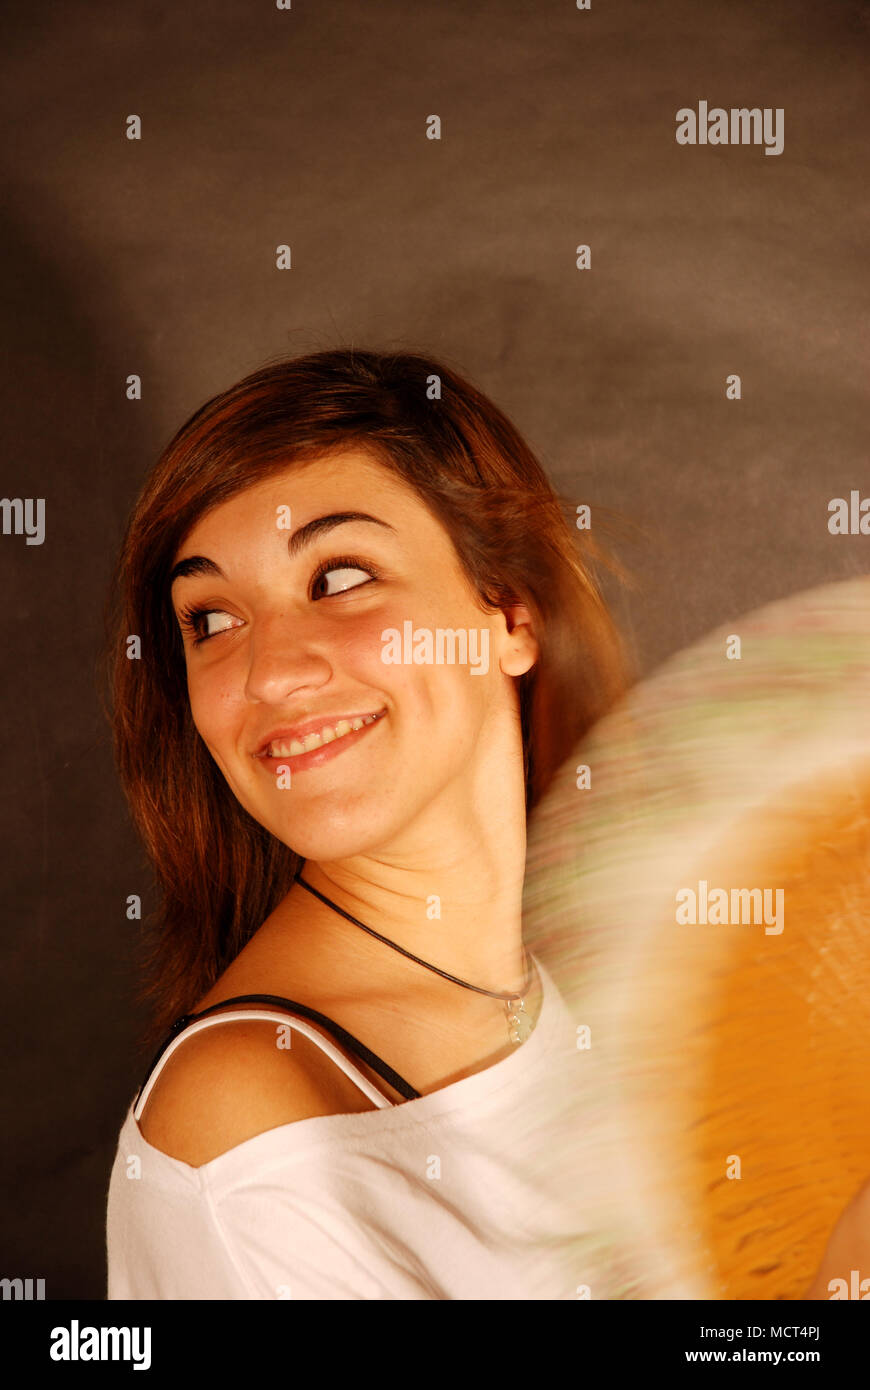 Young woman fanning herself. Stock Photo